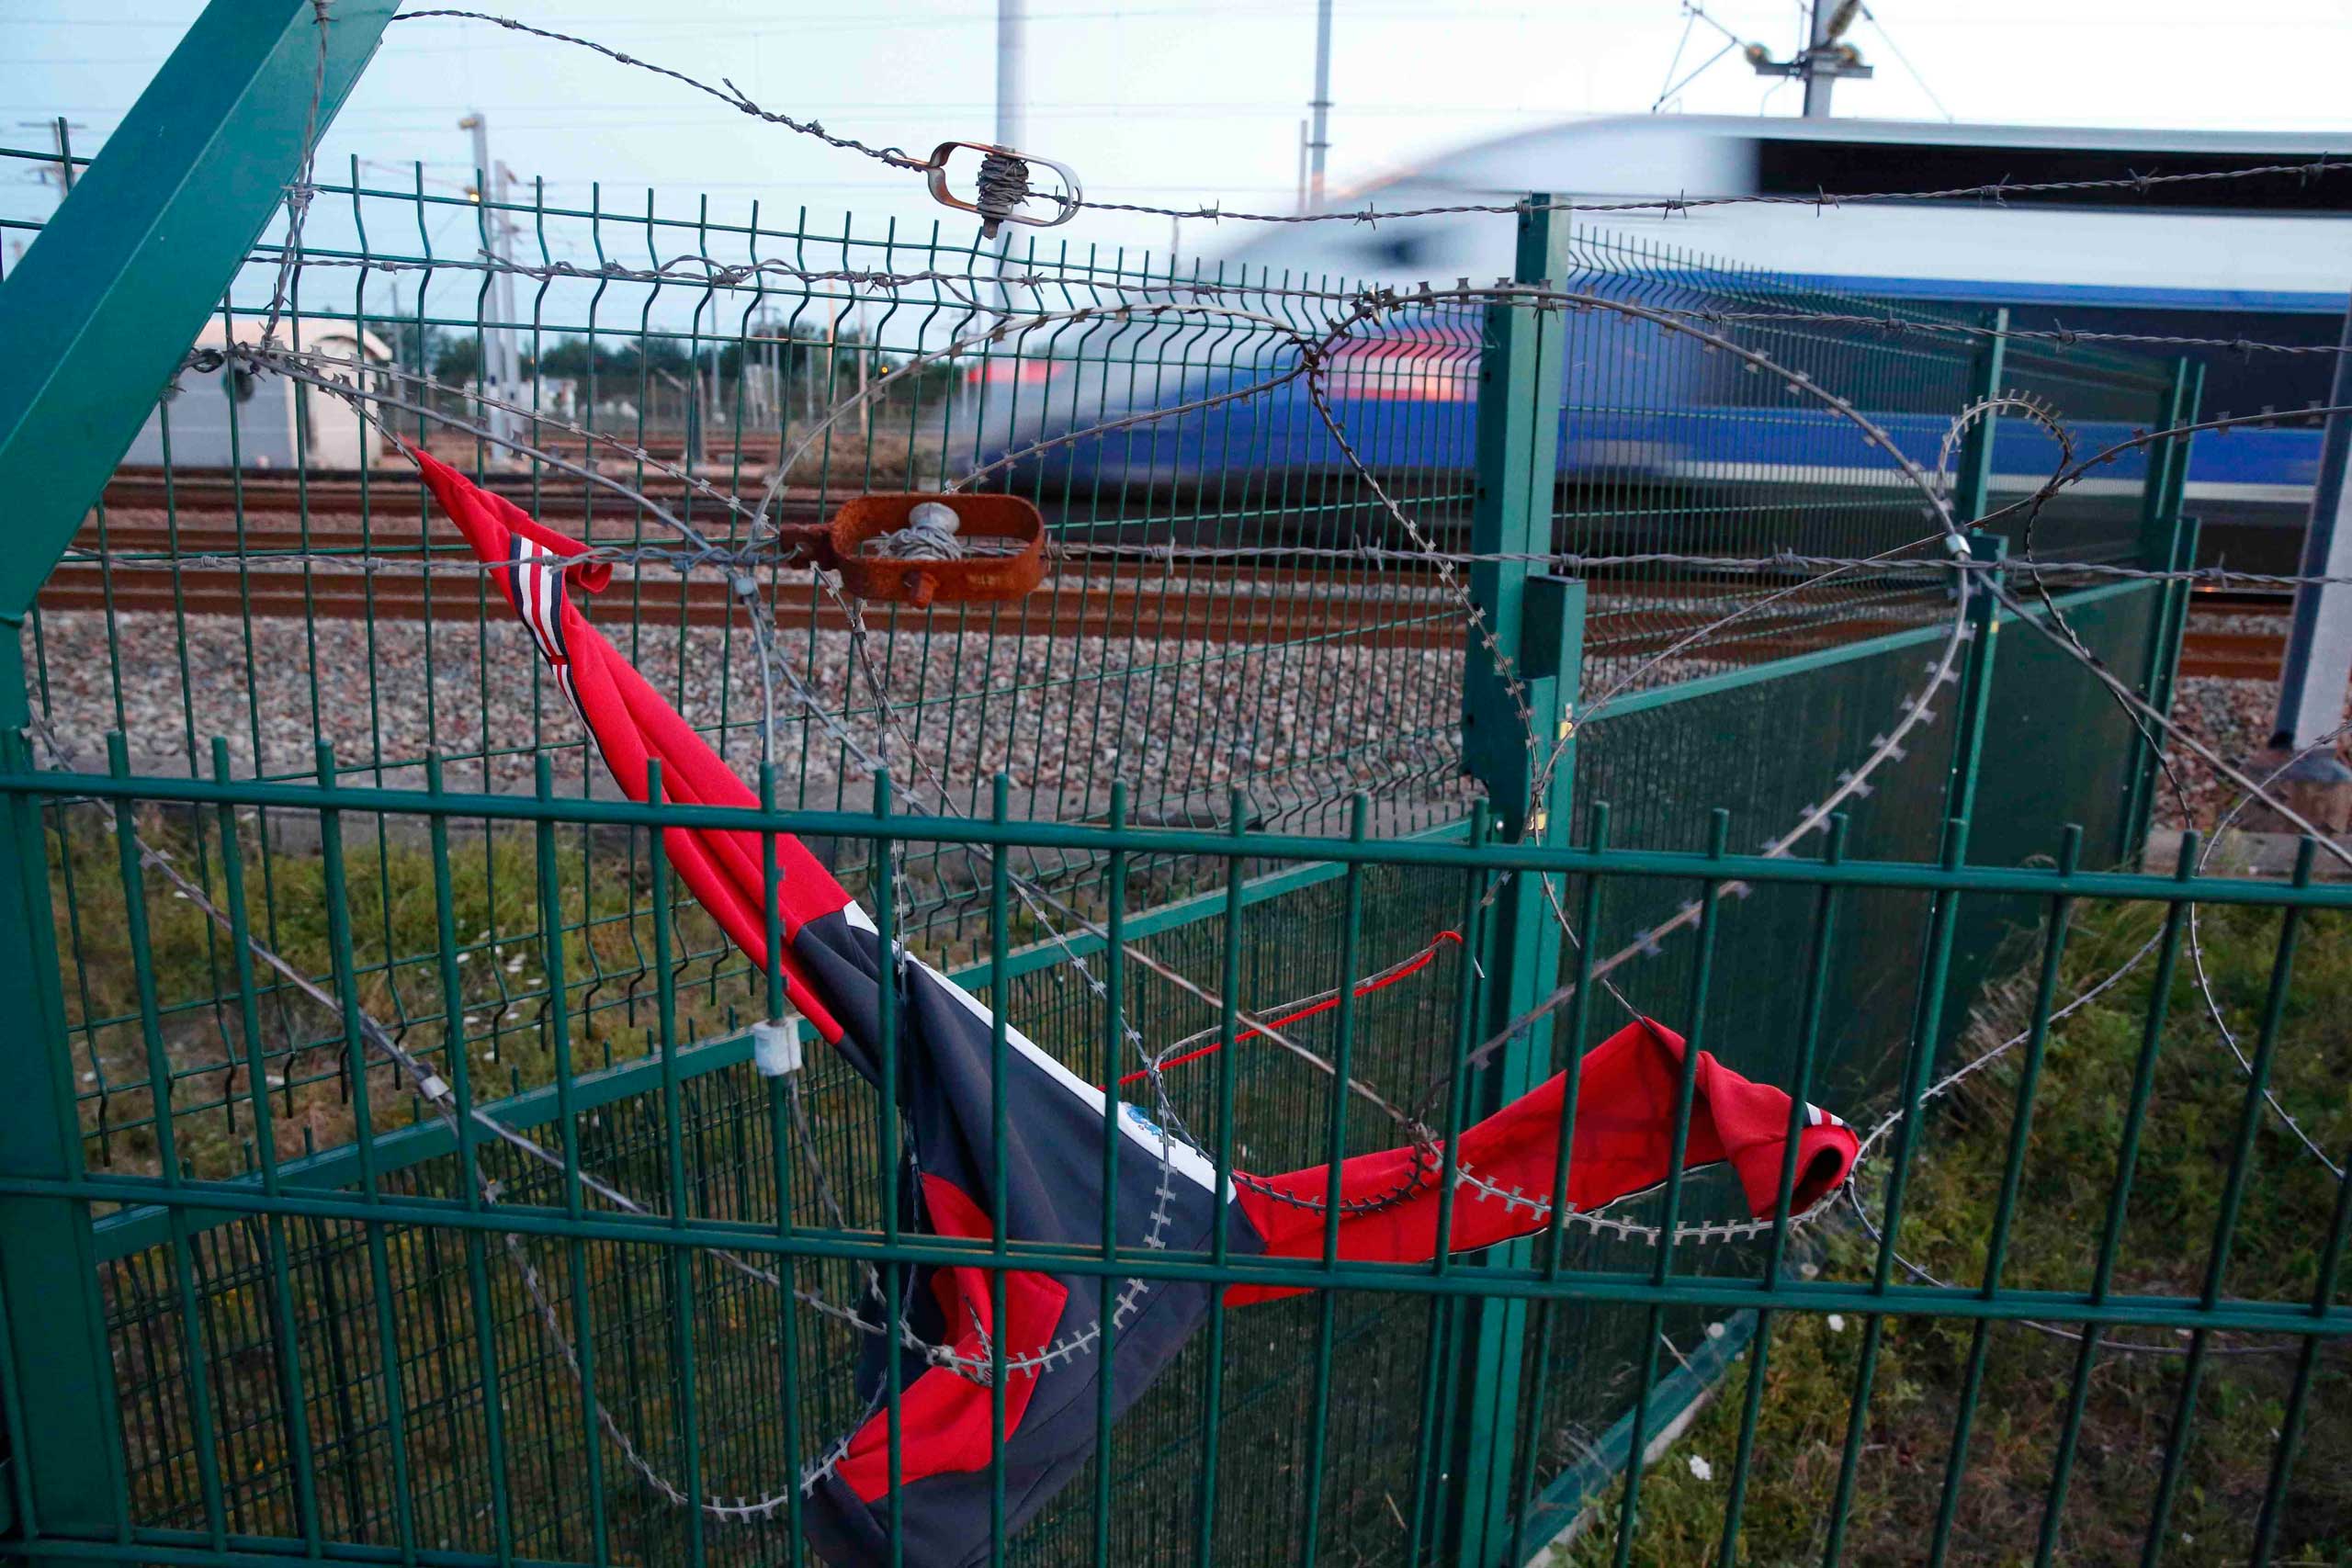 A TGV high speed train passes behind razor-wire fencing close to the Channel Tunnel site in Calais, northern France,  on July 29, 2015.